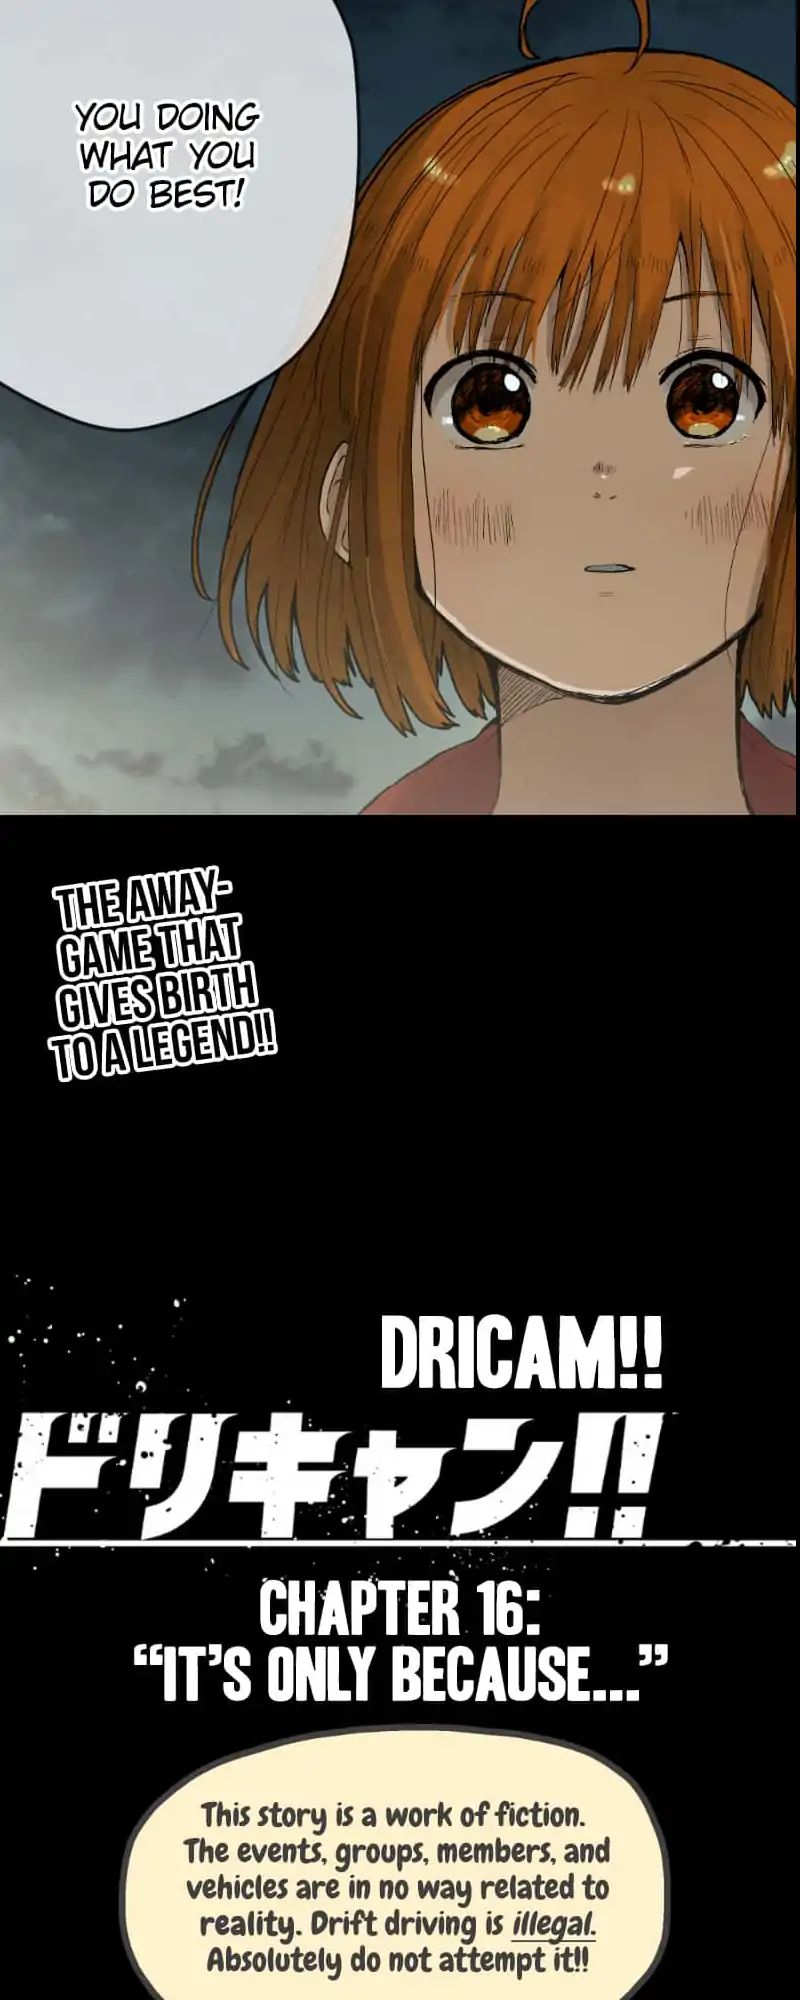 Dricam!! Chapter 16: It's Only Because...